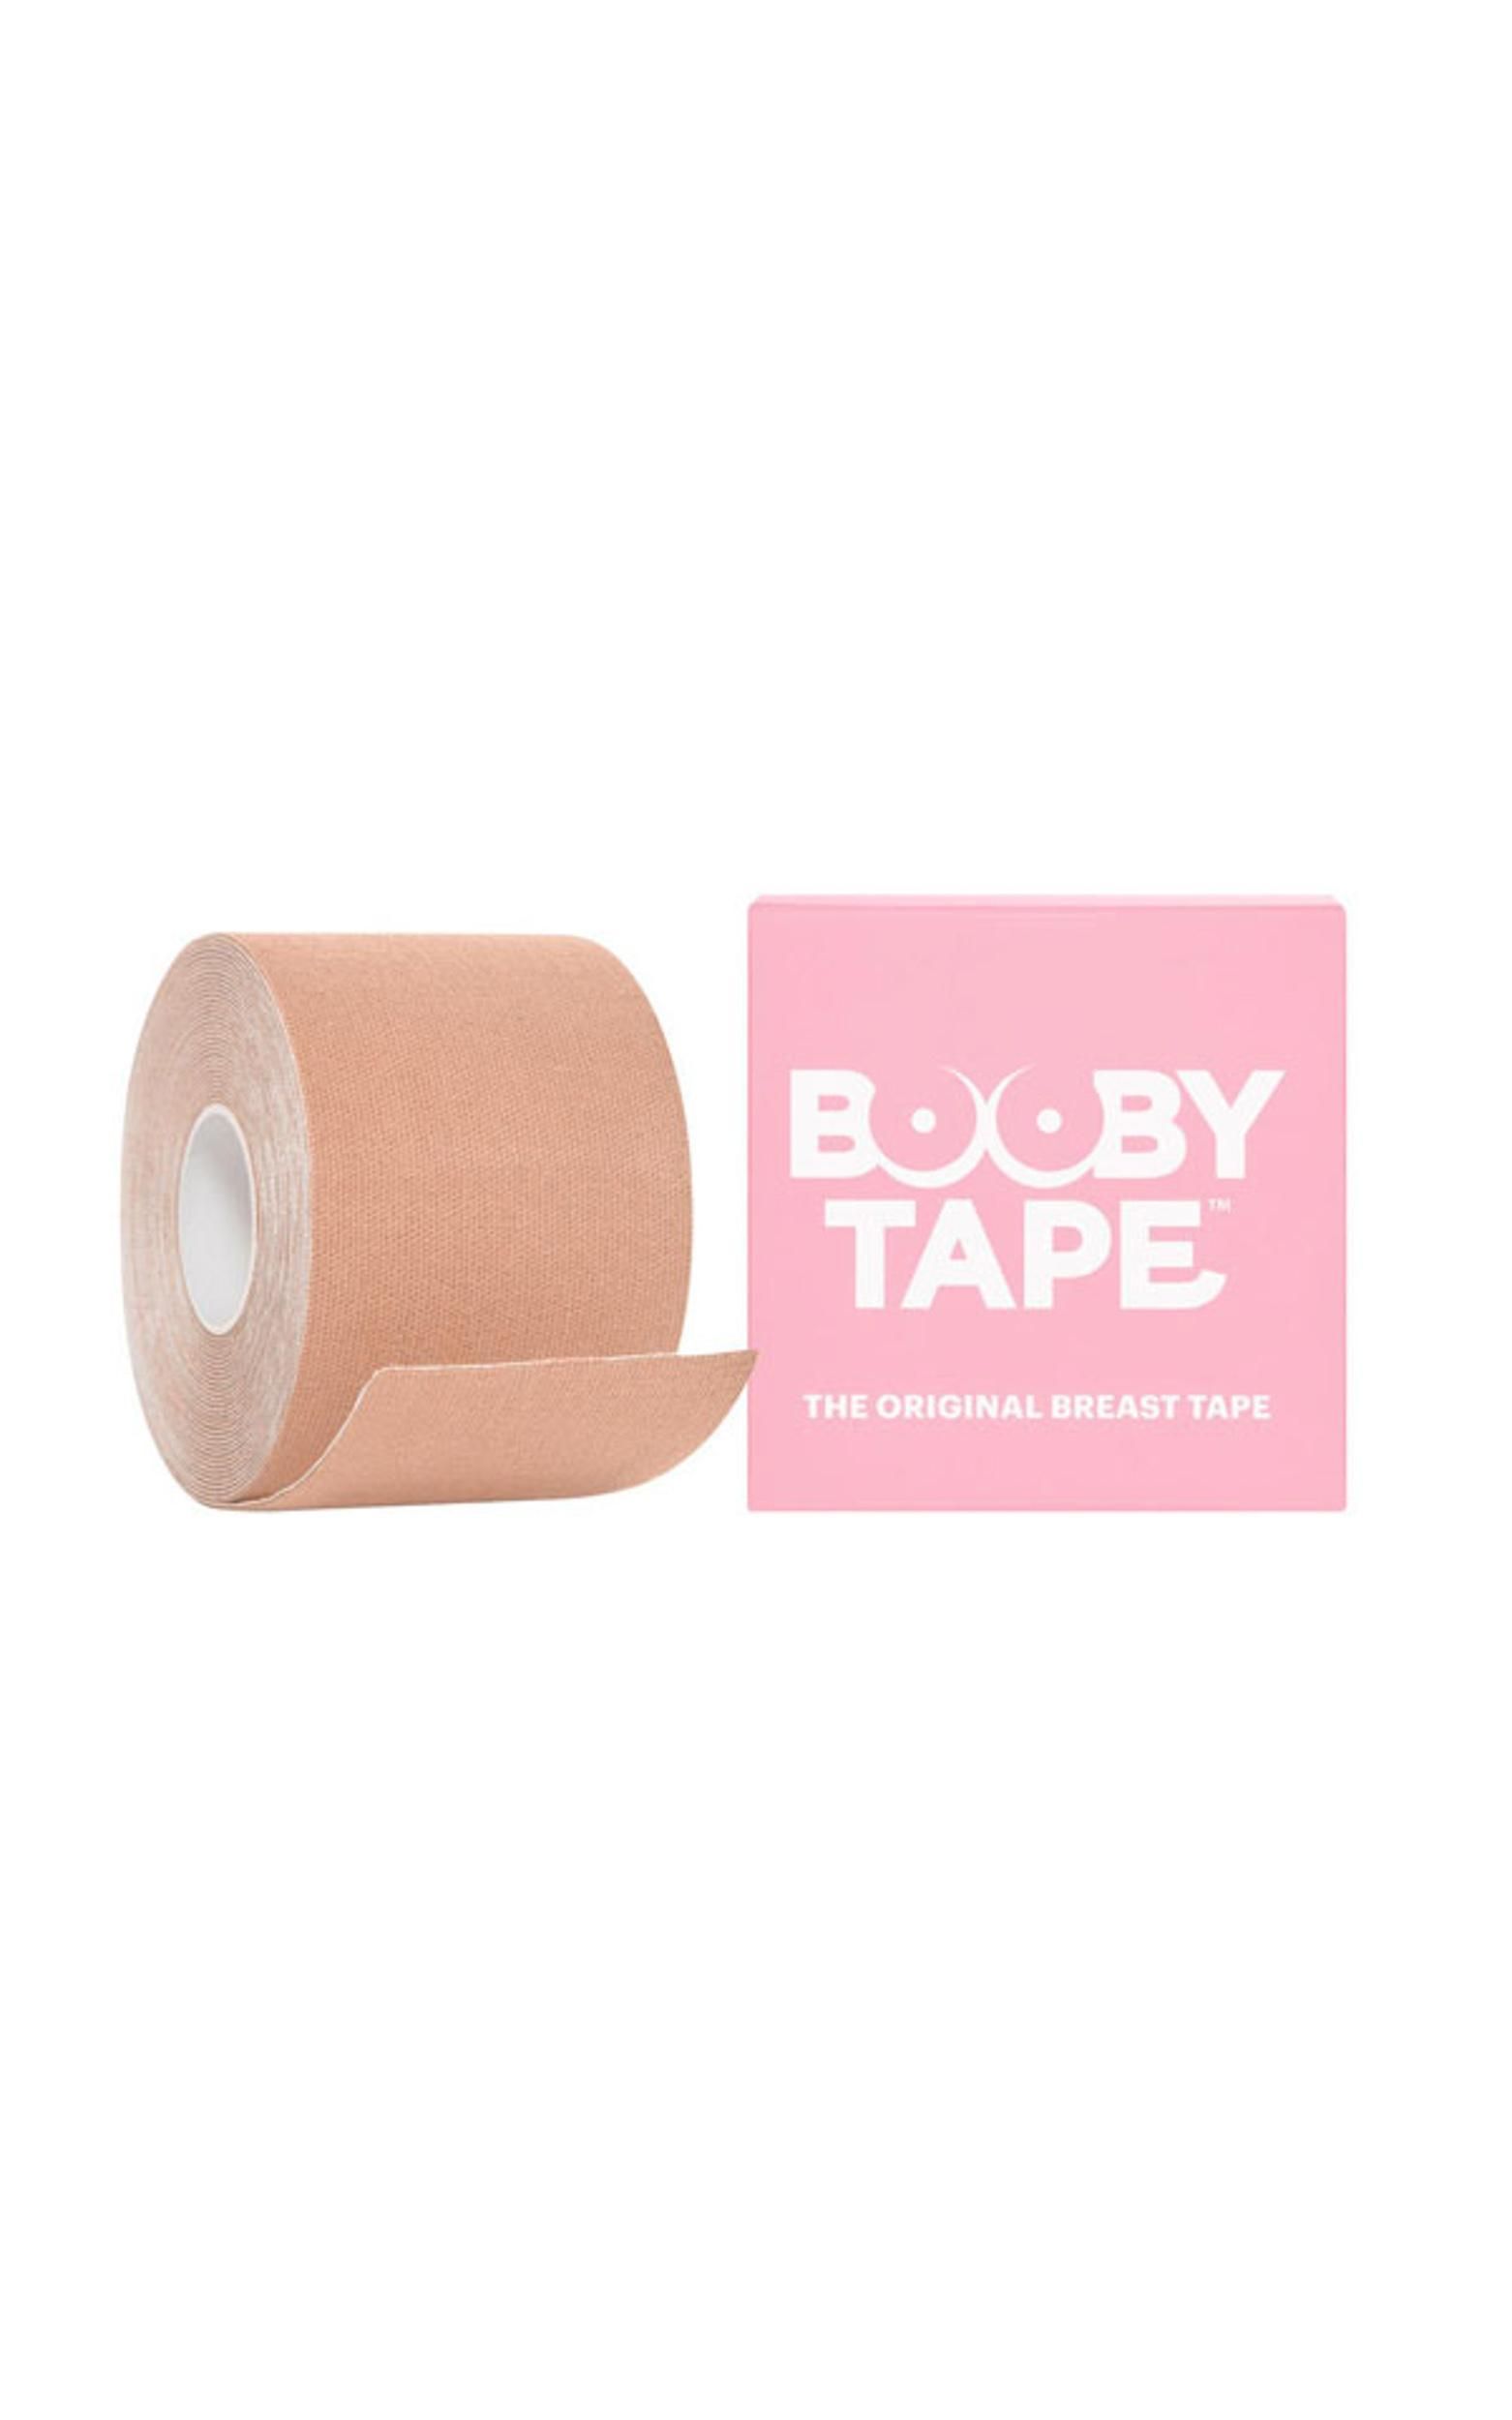 Booby Tape in Nude | Showpo - deactived